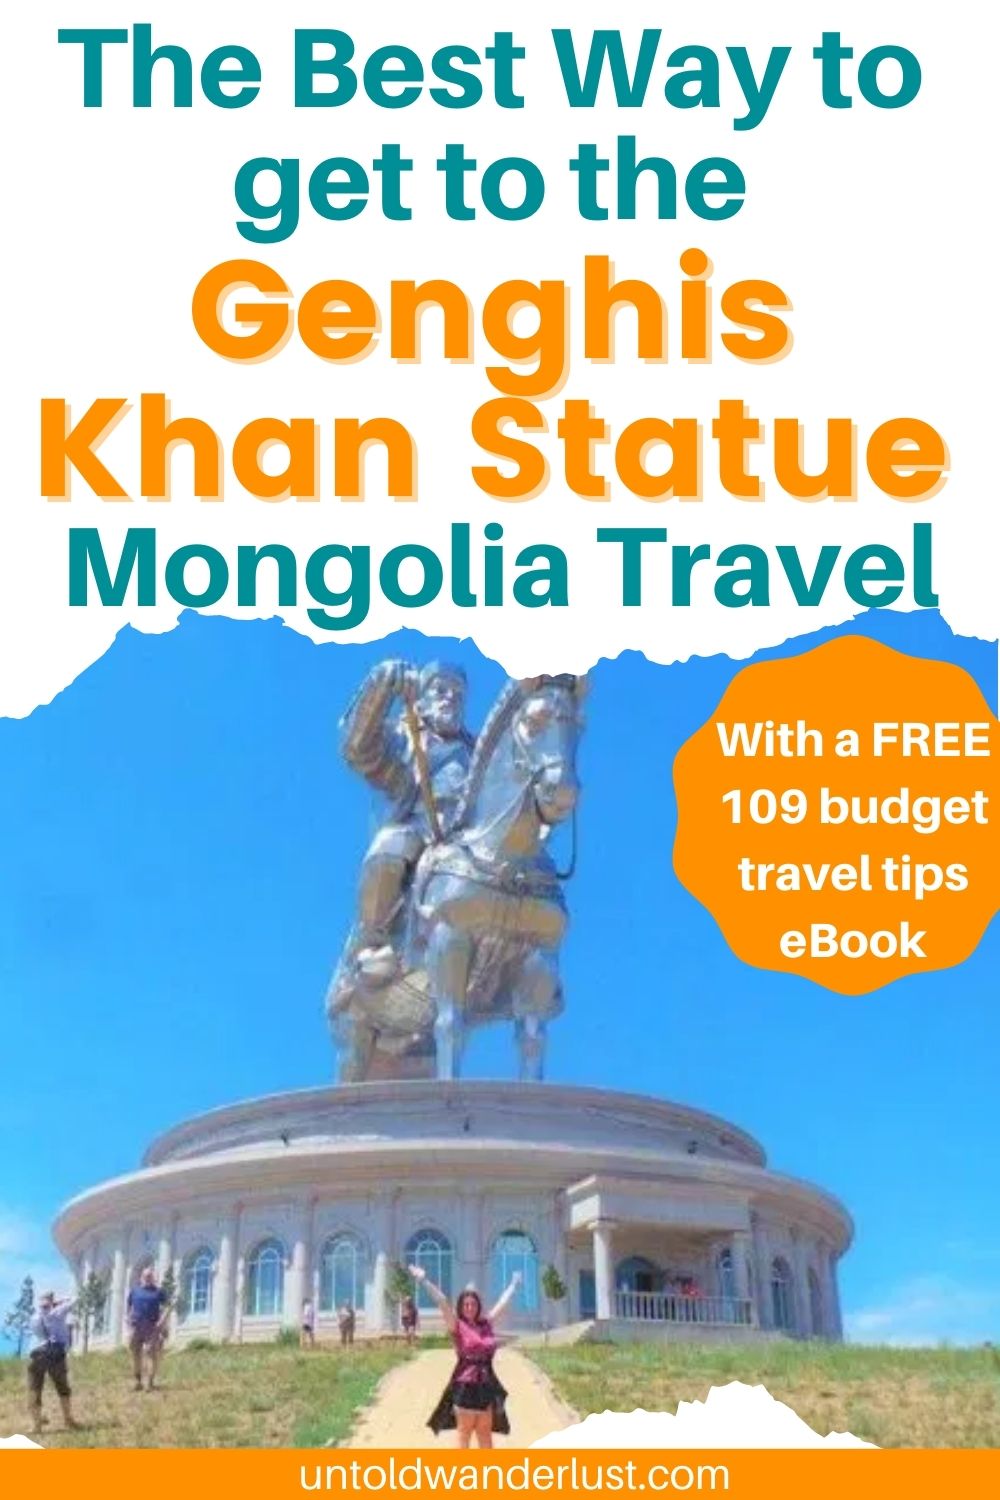 The Best Way to get to the Genghis Khan Statue in Mongolia